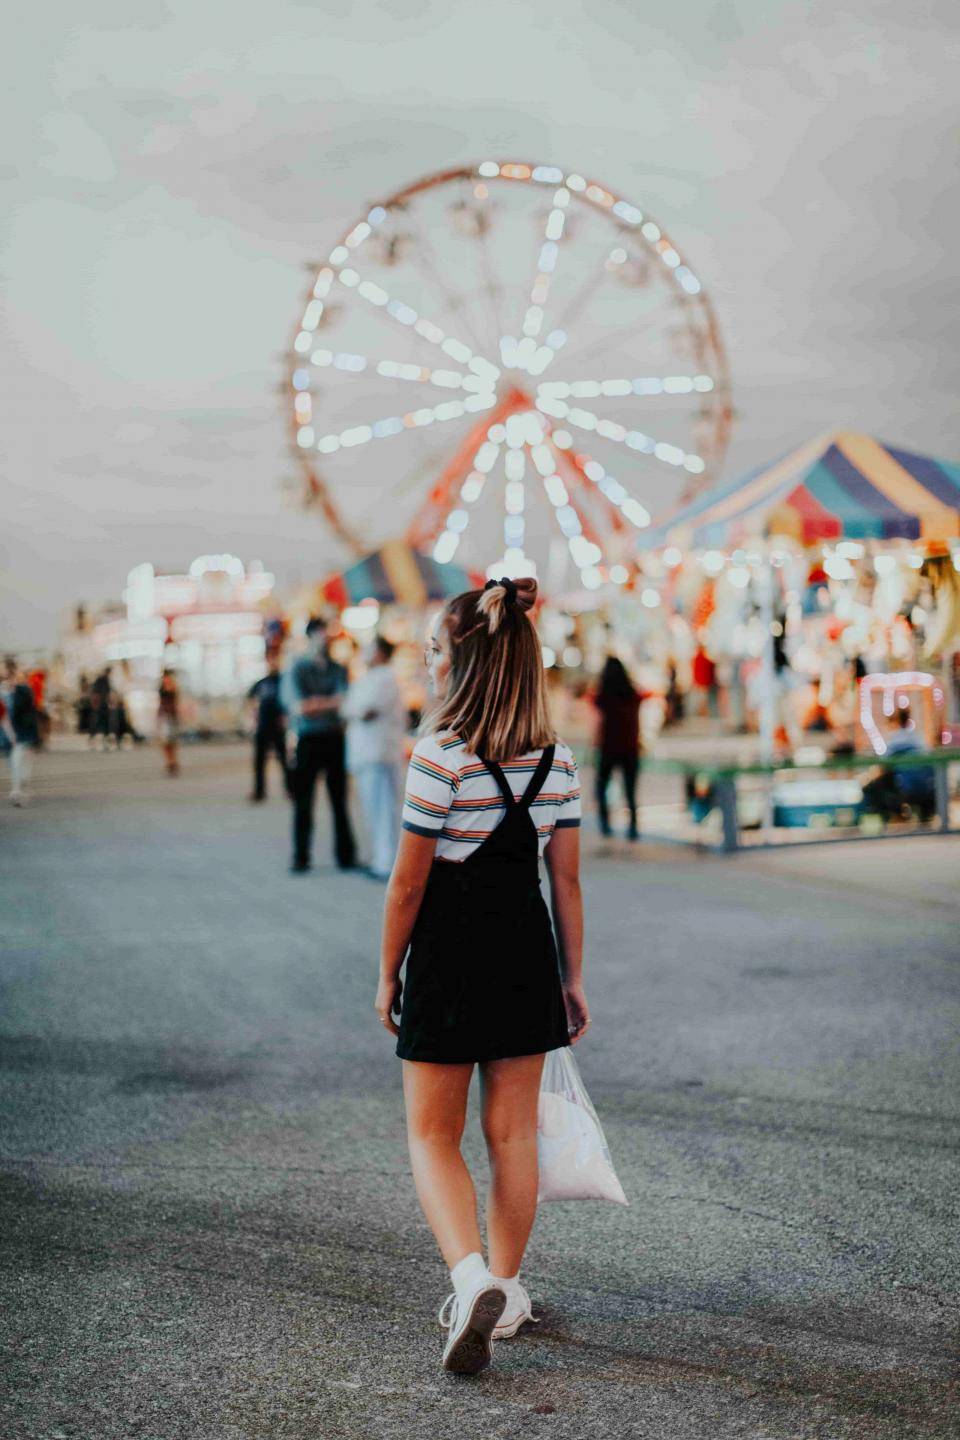 Teenager at retro fairground. Photo by Hannah Busing on Unsplash.